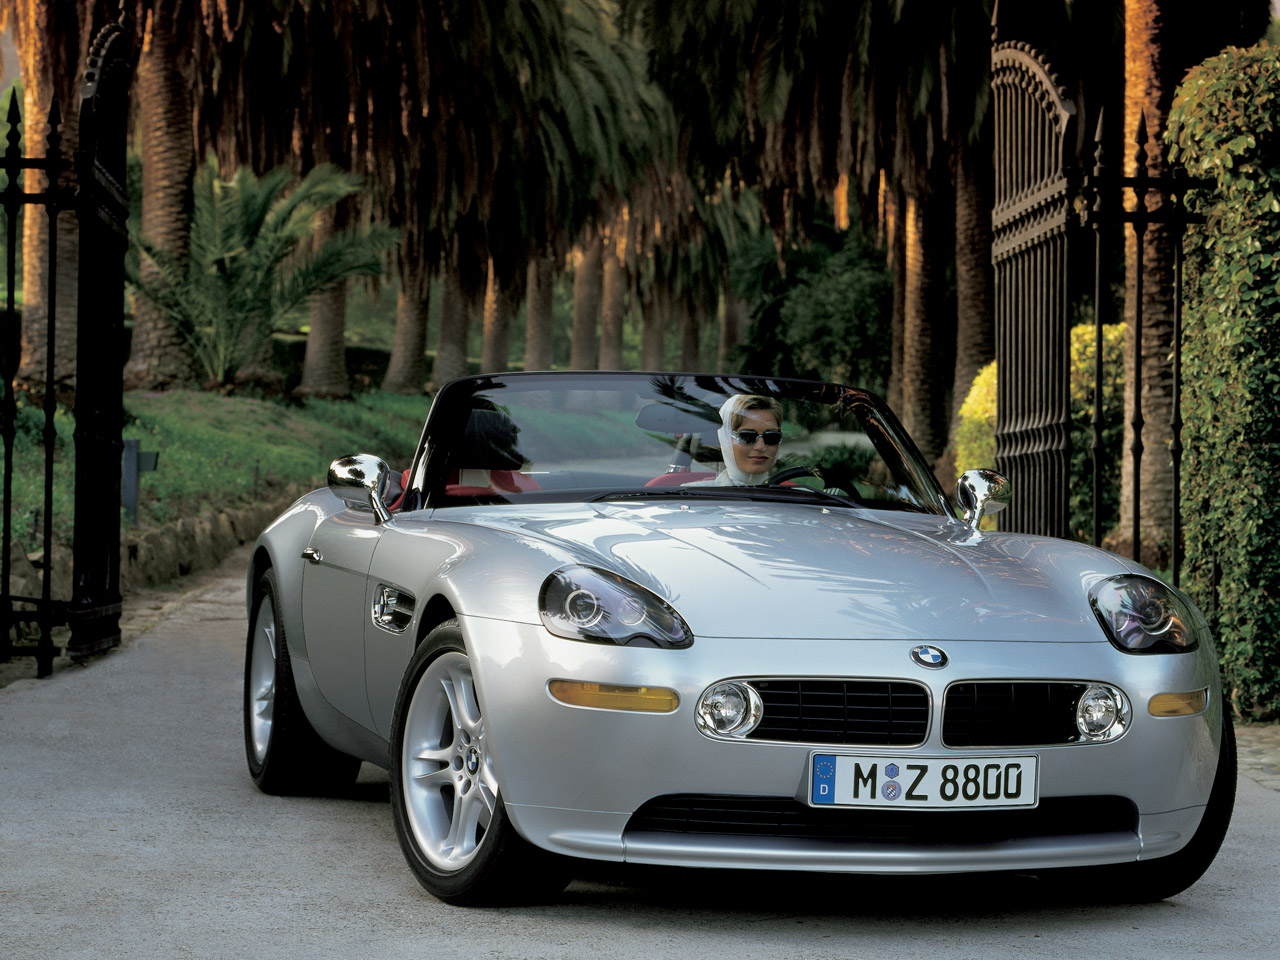 As a comparison, in California, a 2002 BMW Z8 is listed on eBay with a Buy